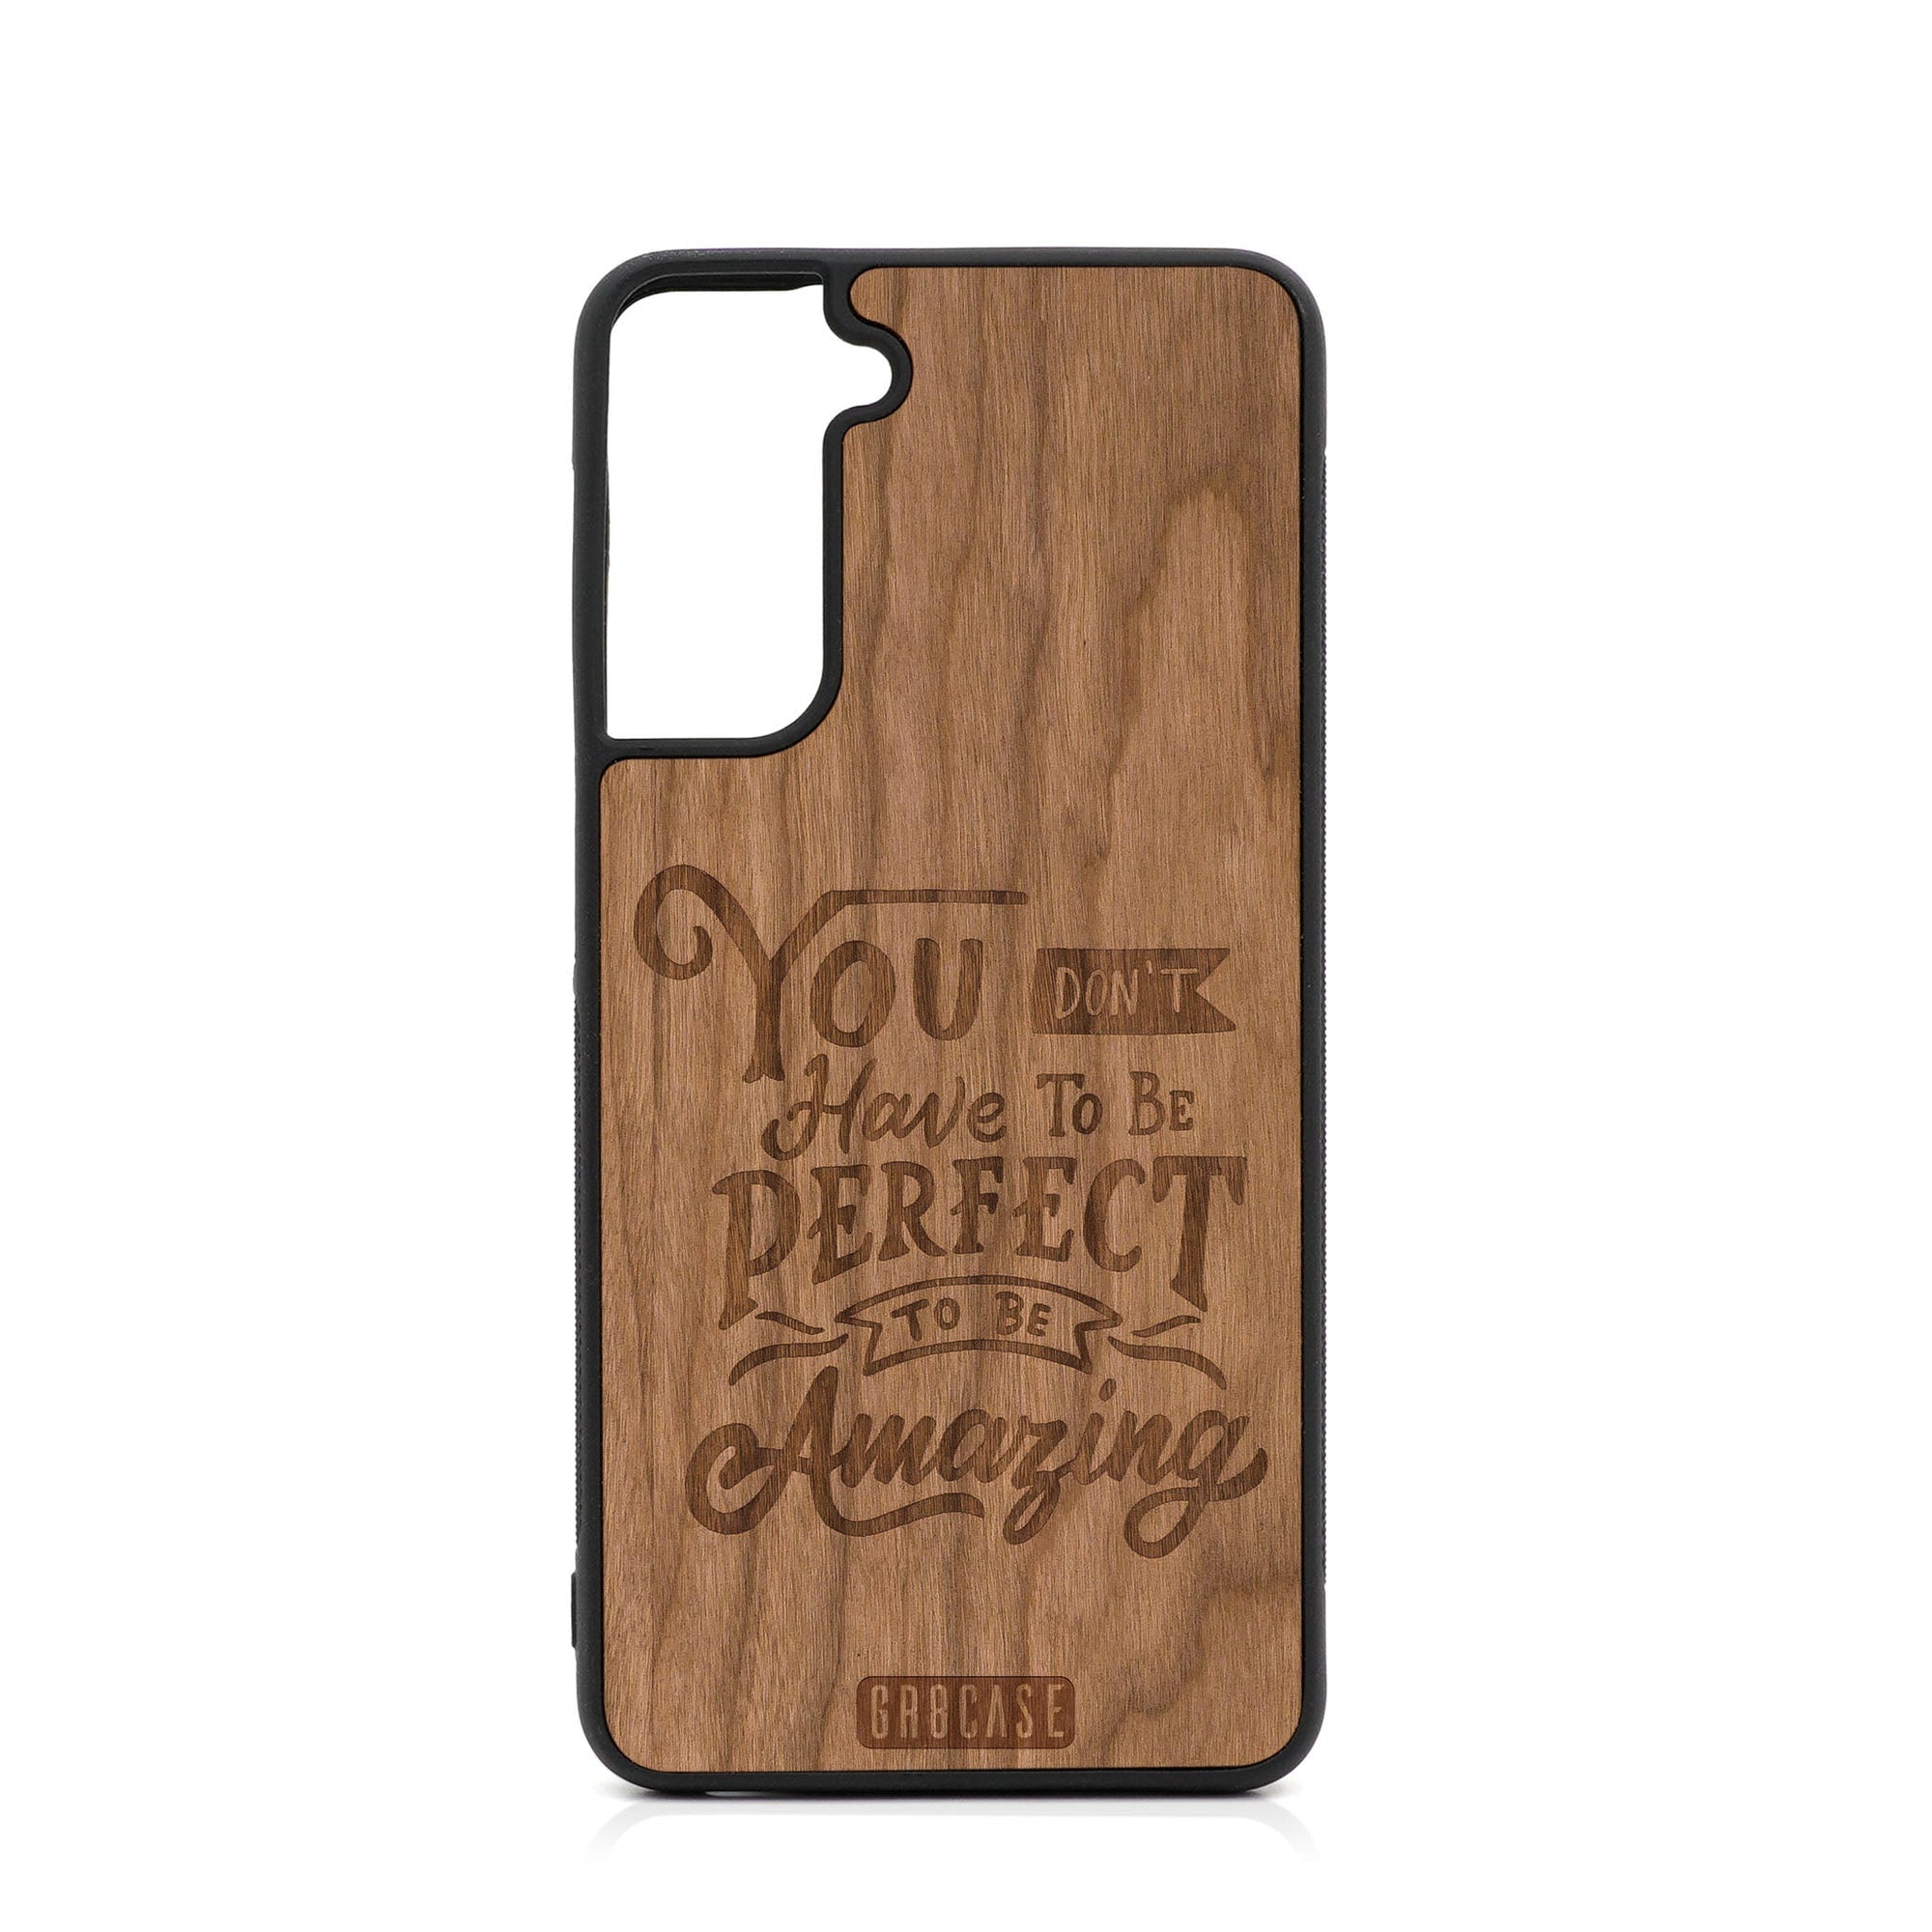 You Don't Have To Be Perfect To Be Amazing Design Wood Case For Samsung Galaxy S21 FE 5G